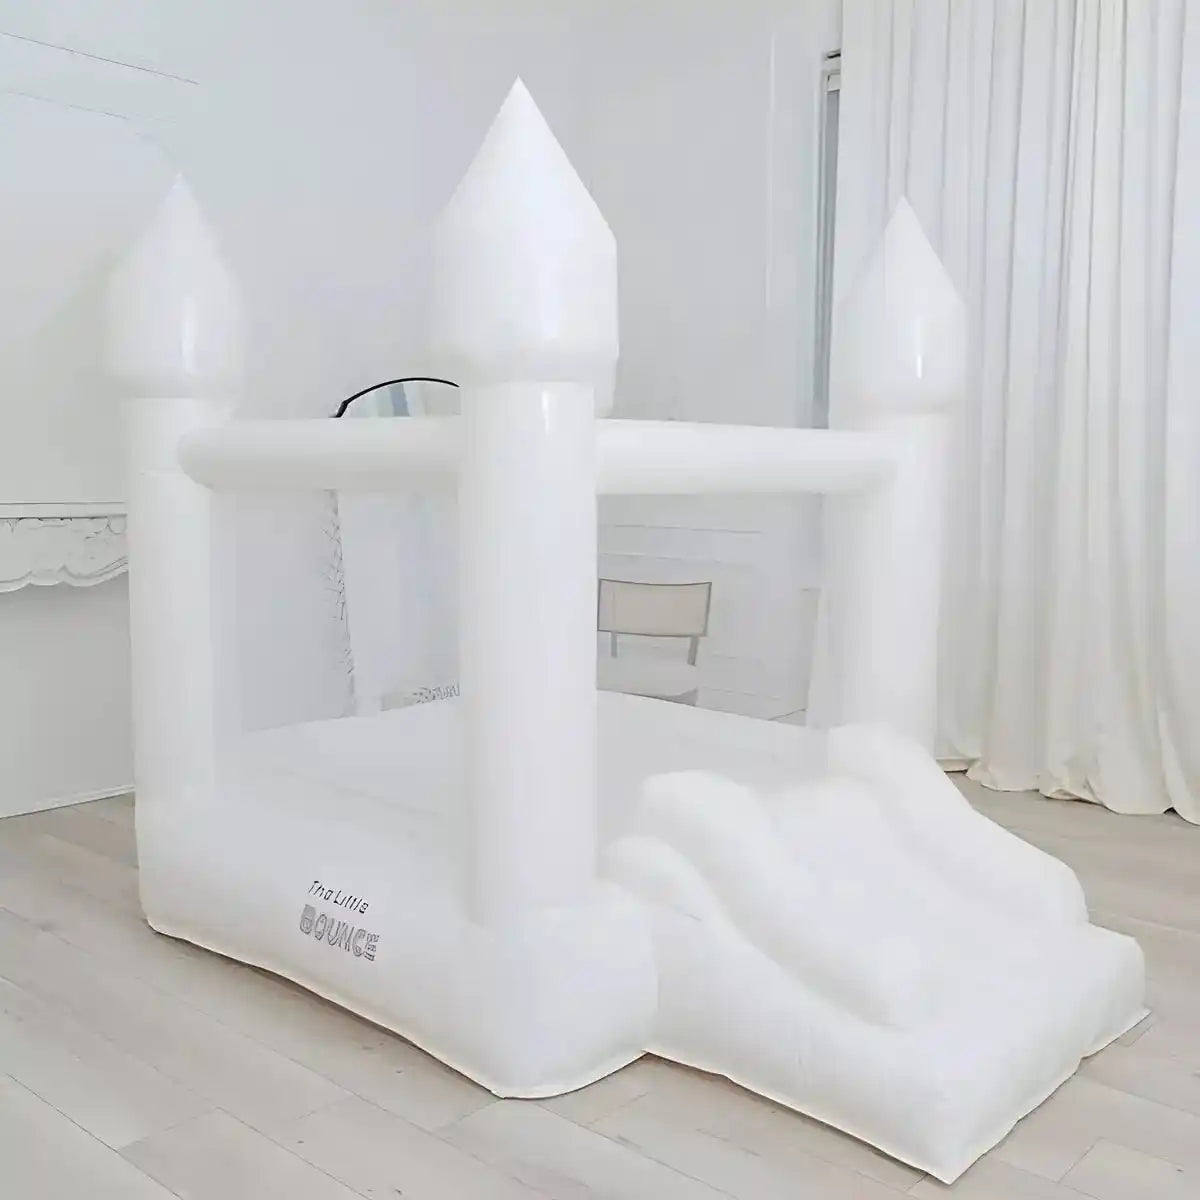 The tiny white bounce house placed in a living room